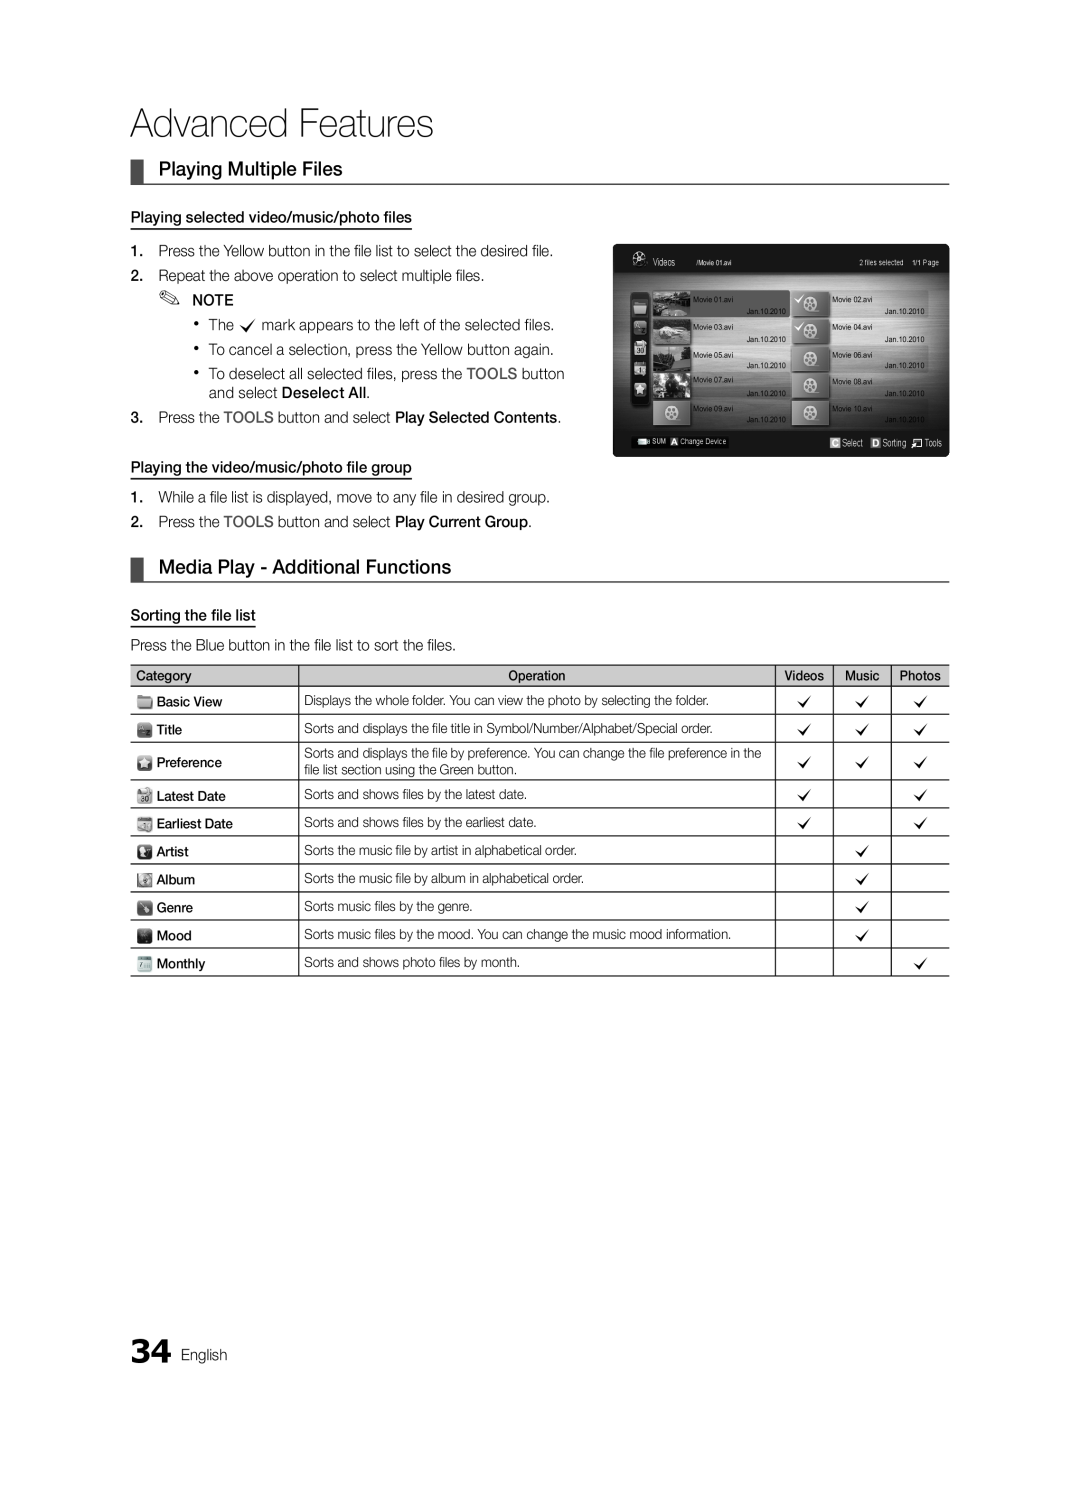 Samsung LN32C550 user manual Playing Multiple Files, Media Play - Additional Functions, Advanced Features 